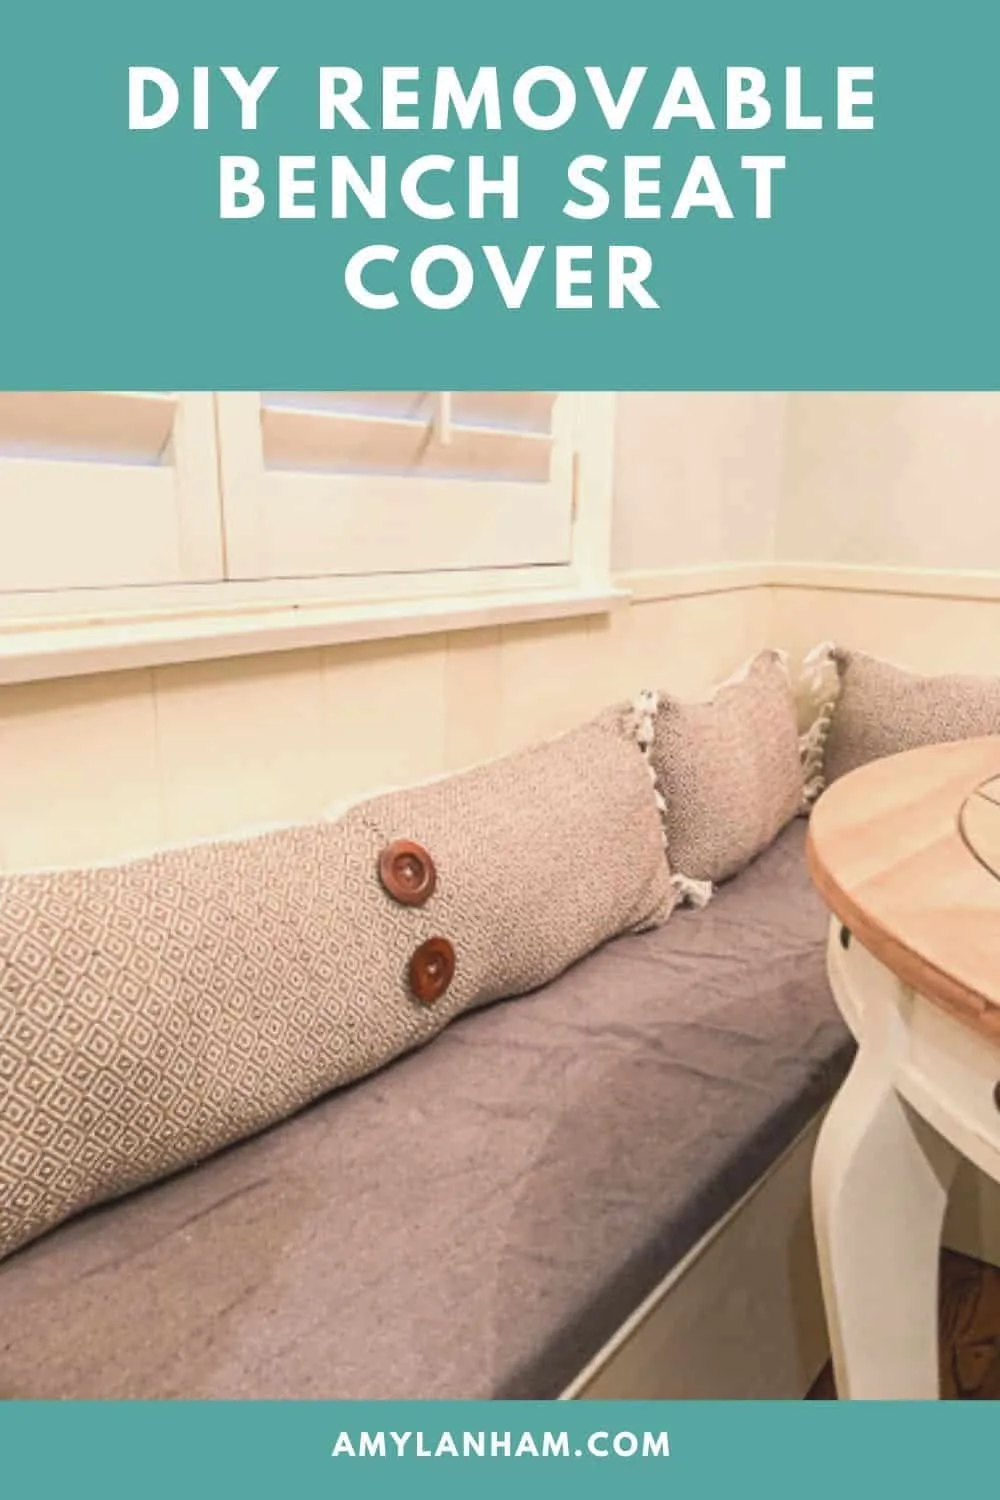 How to Make an Upholstered Foam Cushion From a Shower Curtain